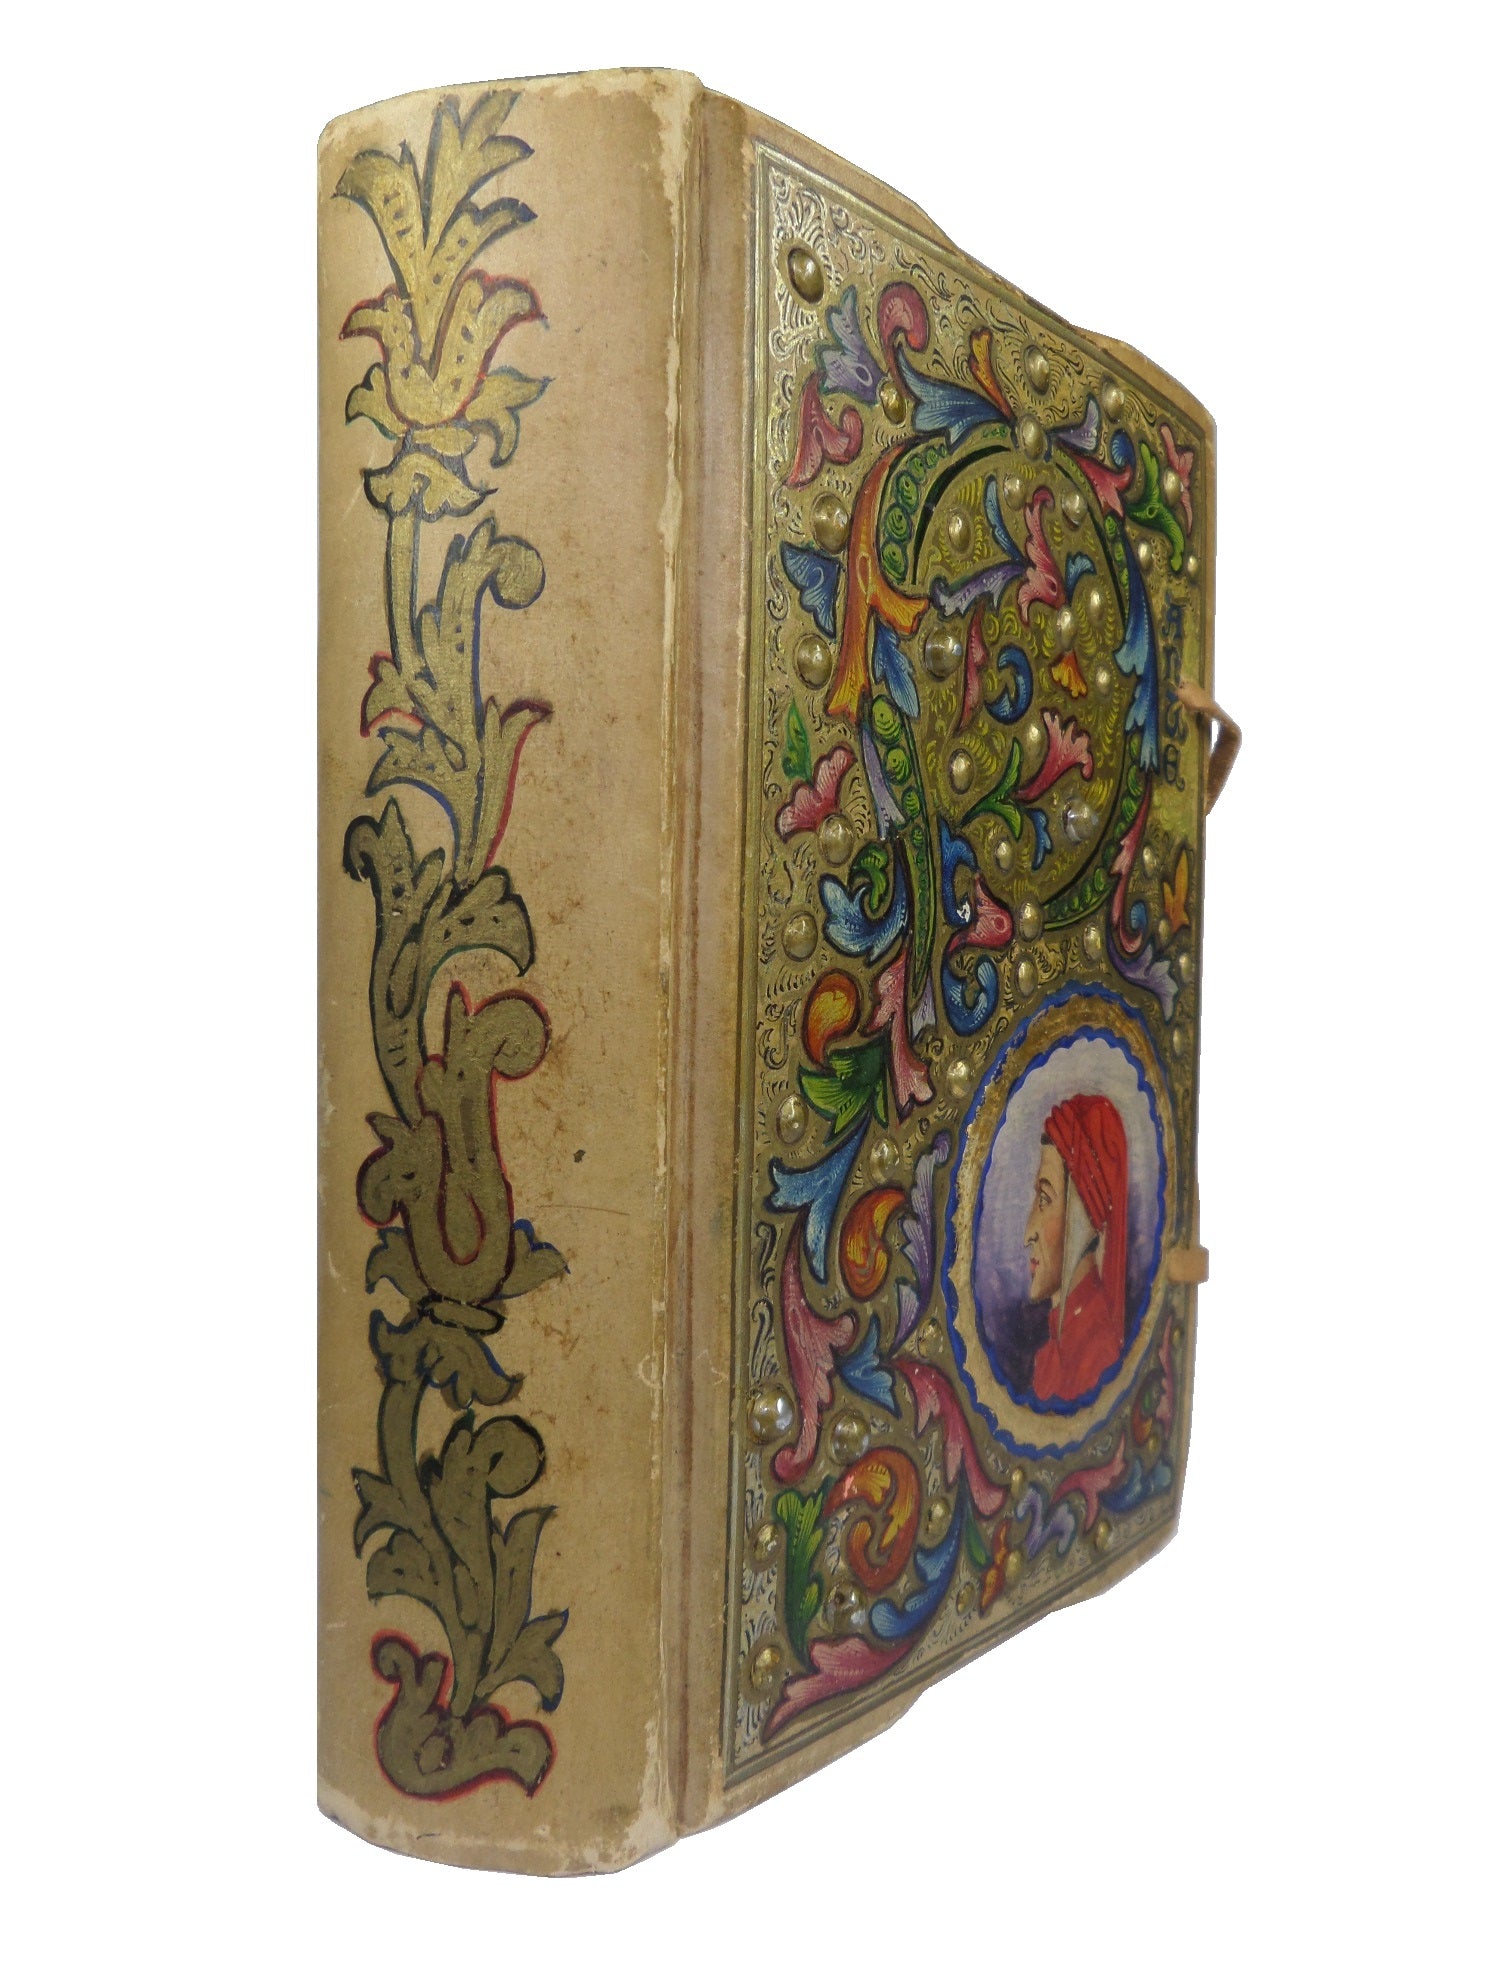 THE VISION OF DANTE ALIGHIERI 1844 HAND-PAINTED BINDING BY THE GIANNINI FAMILY